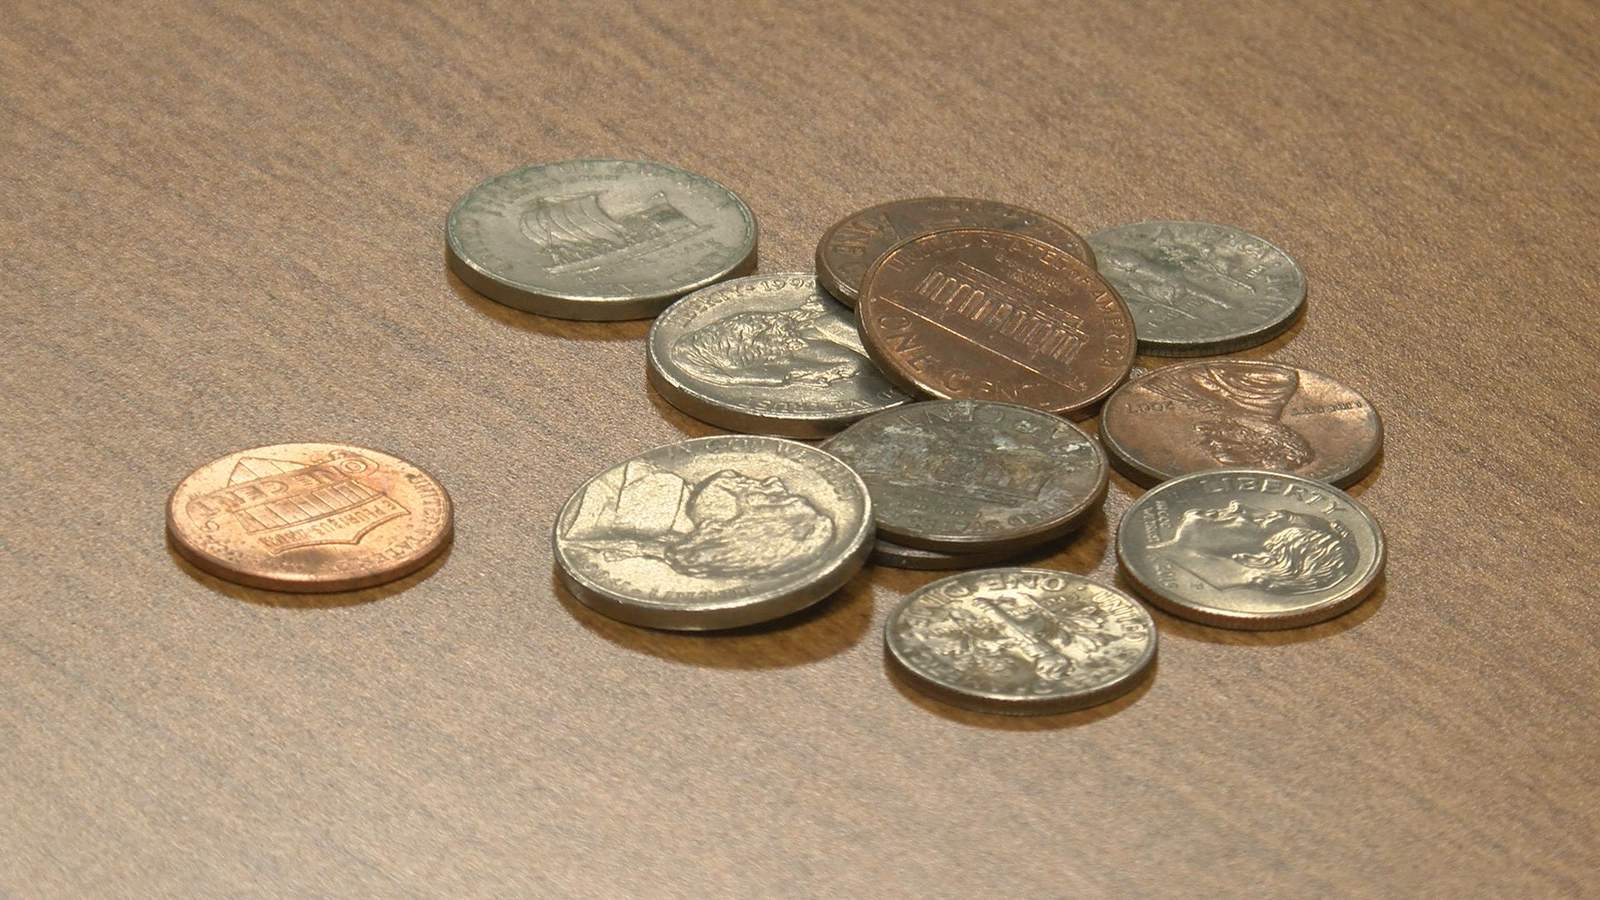 Winn-Dixie parent company turns coin shortage into charity drive